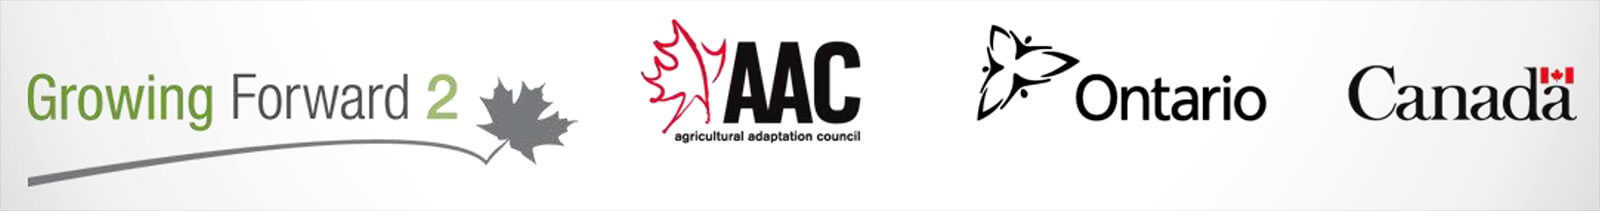 Growing Forward 2, Agricultural Adaptation Council (AAC), Government of Ontario and Government of Canada